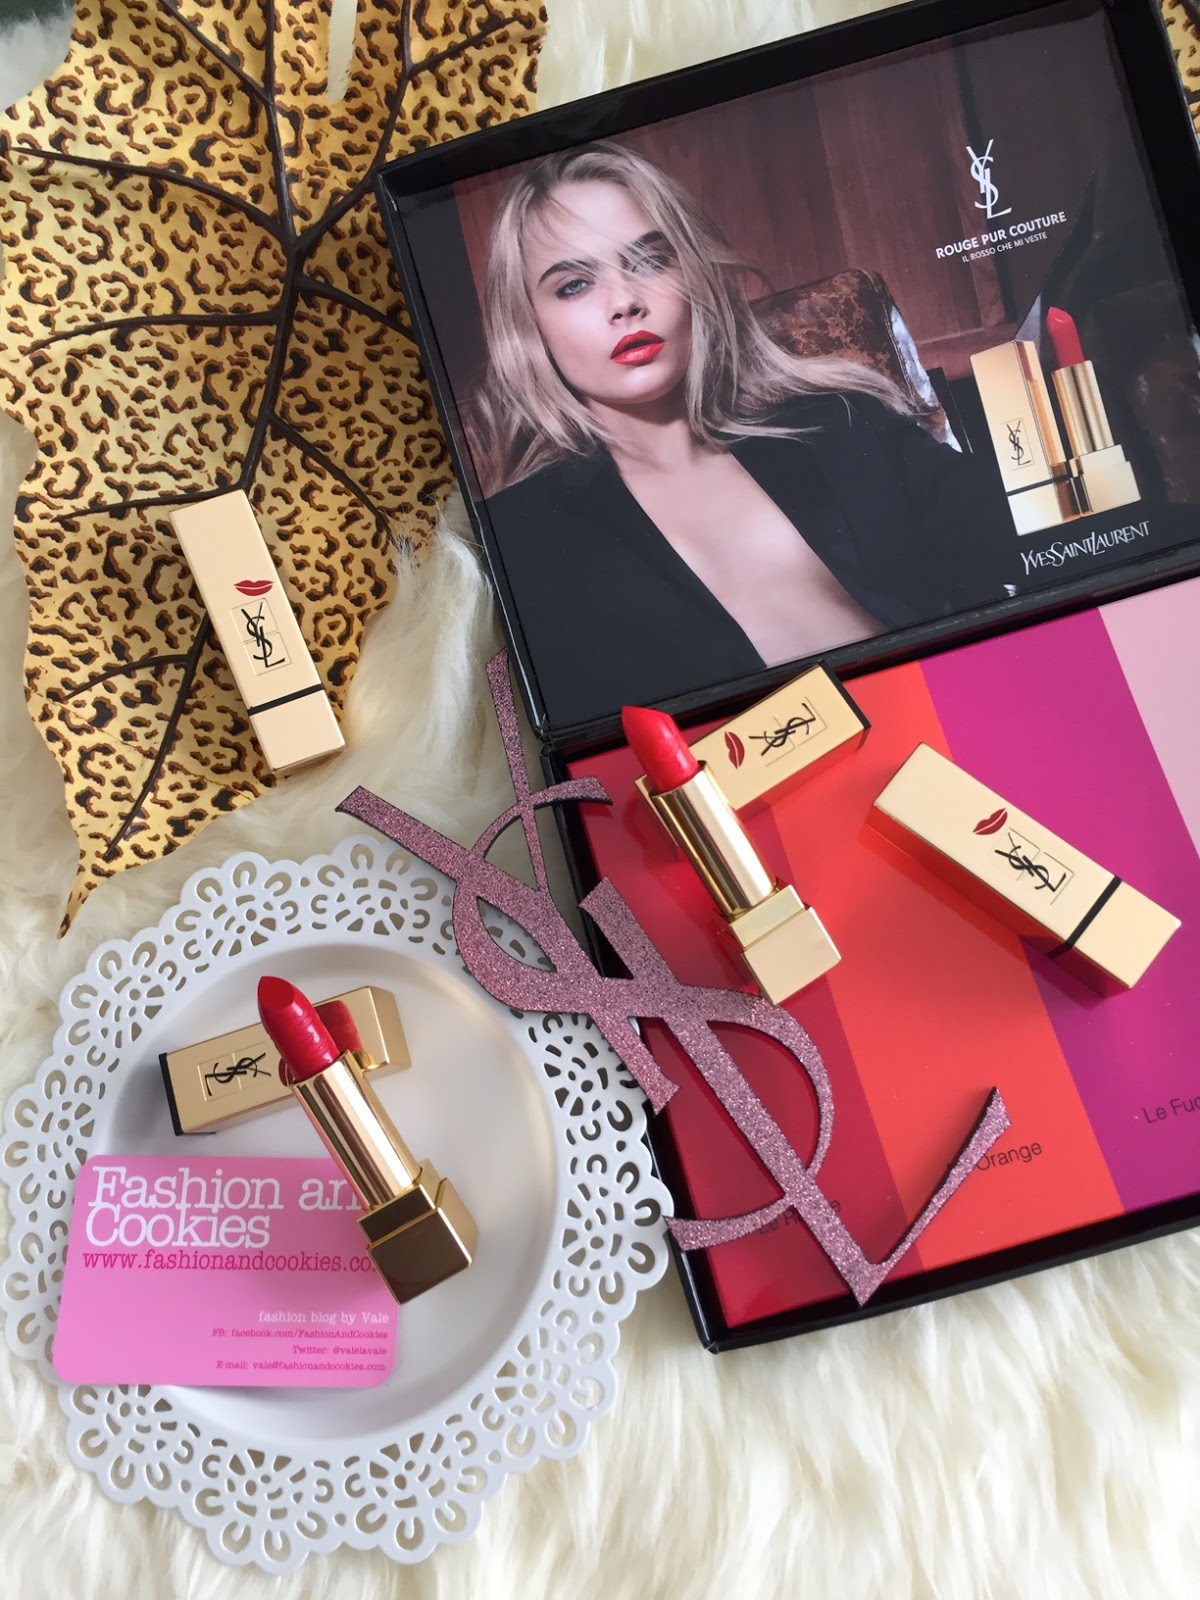 Yves Saint Laurent Rouge Pur Couture Kiss & Love Limited Edition on Fashion and Cookies fashion and beauty blog, beauty blogger